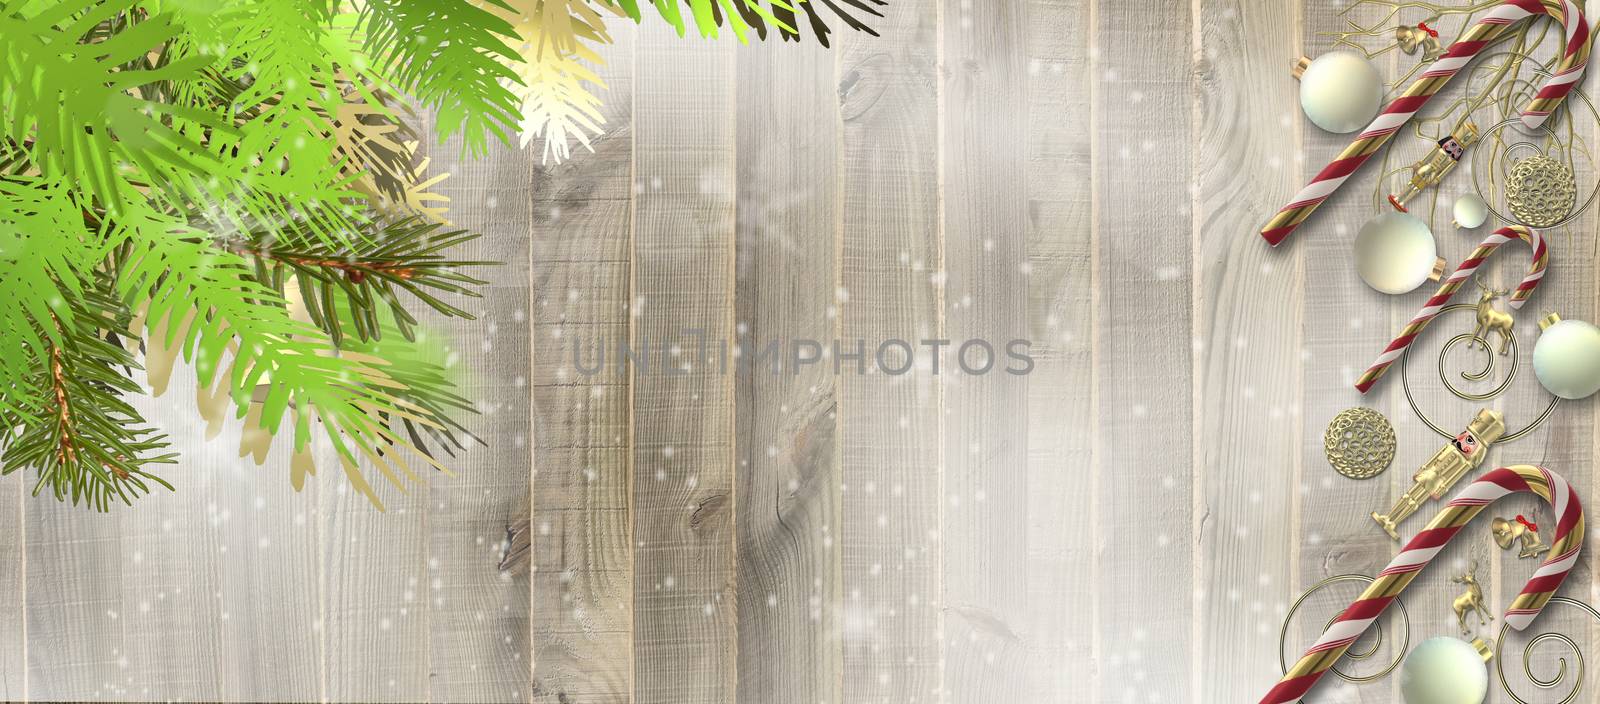 Christmas frame of realistic 3D Xmas symbols on wood. Xmas fir branches, 3D Xmas balls baubles, gold symbols on wooden background. Horizontal festive 3D illustration. Flat lay, place for text